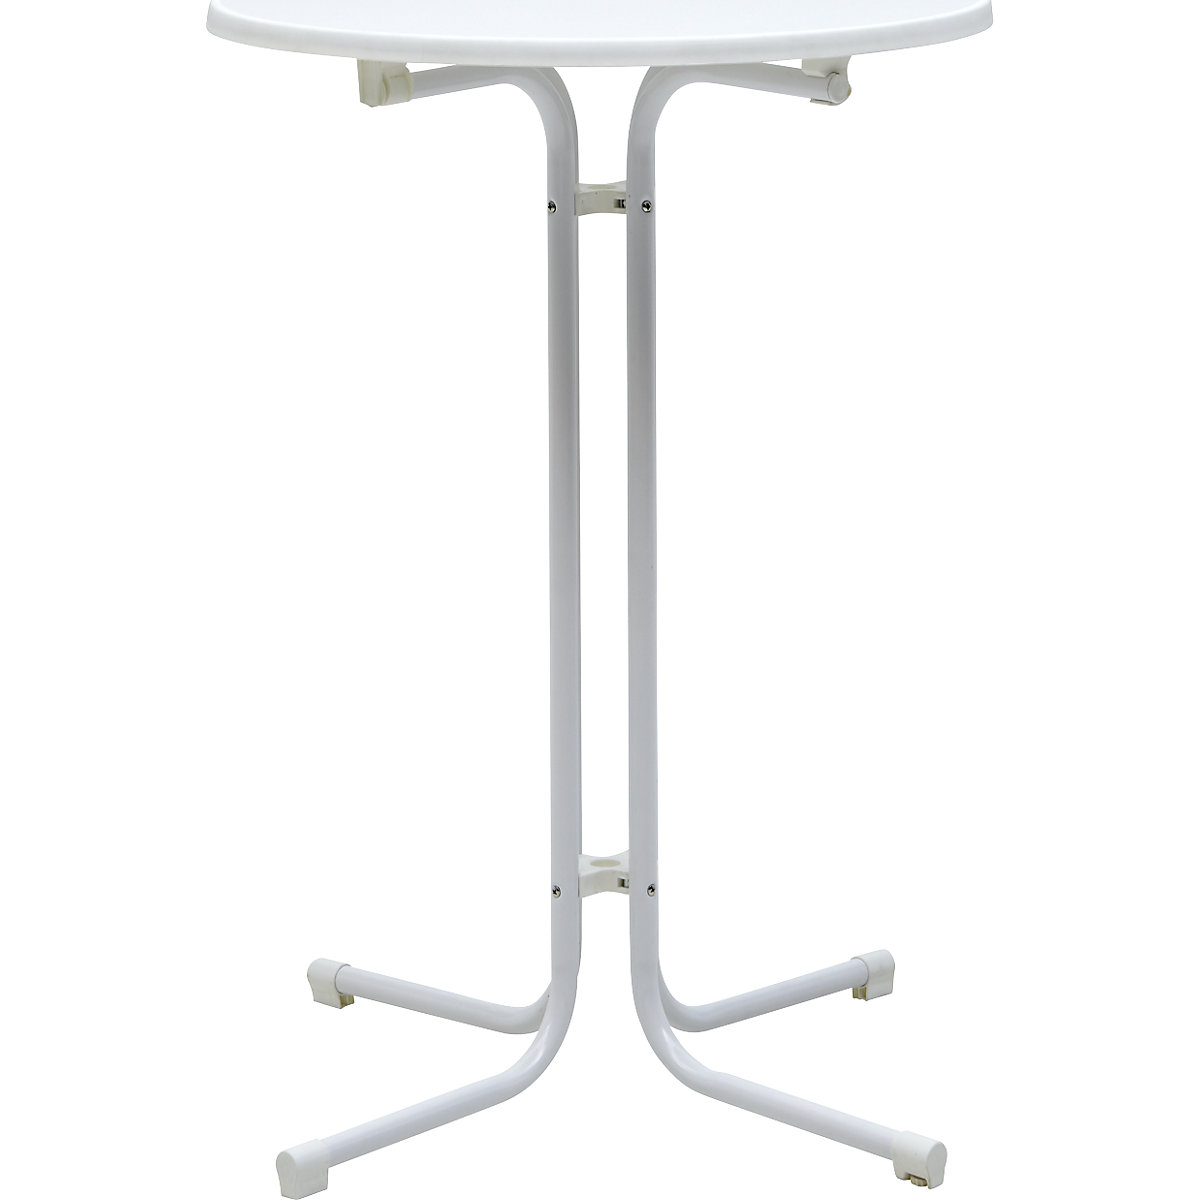 Pedestal table for outdoors, HxØ 1100 x 800 mm, white, 10+ items-3